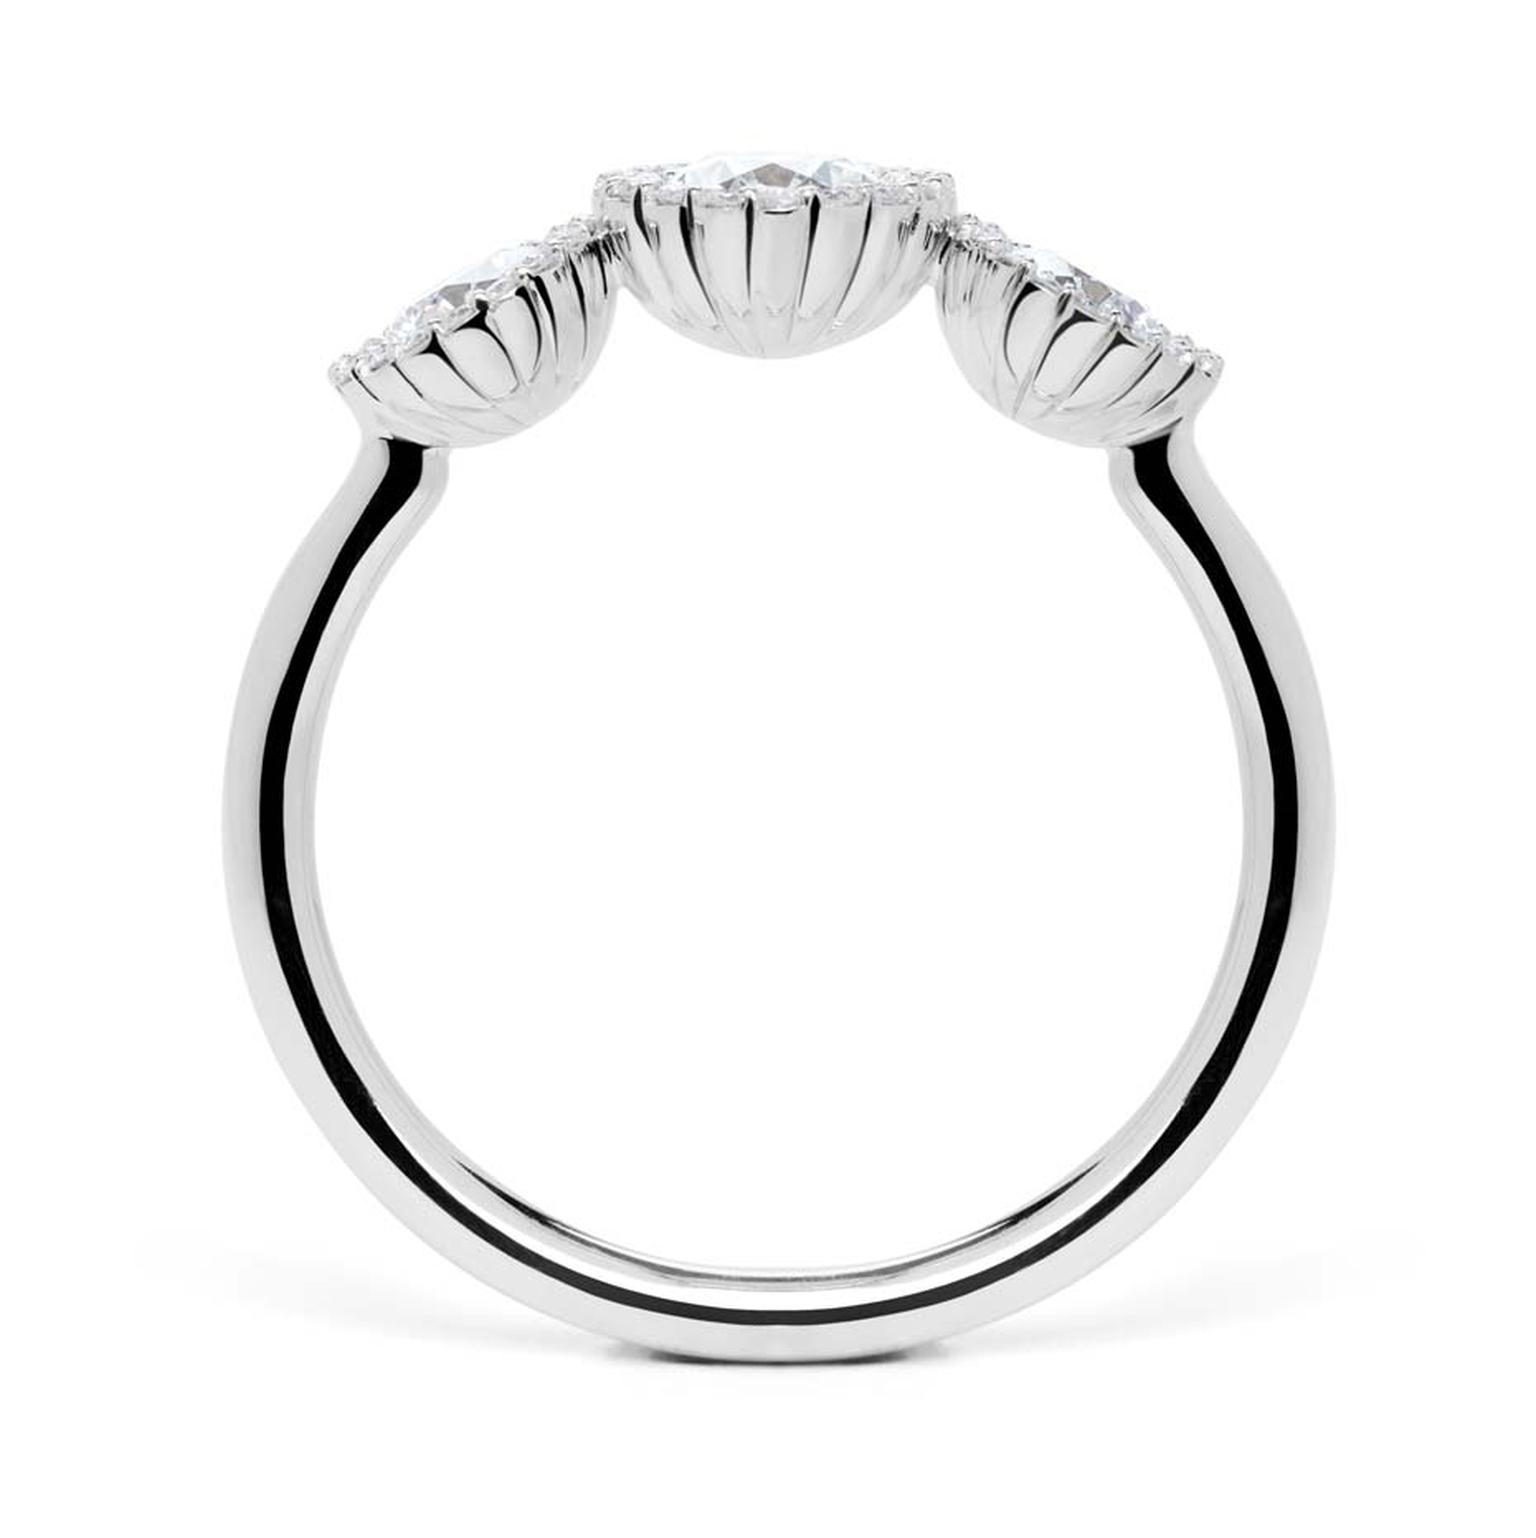 Andrew Geoghegan Cannelé Trois white gold engagement ring features a fluted setting